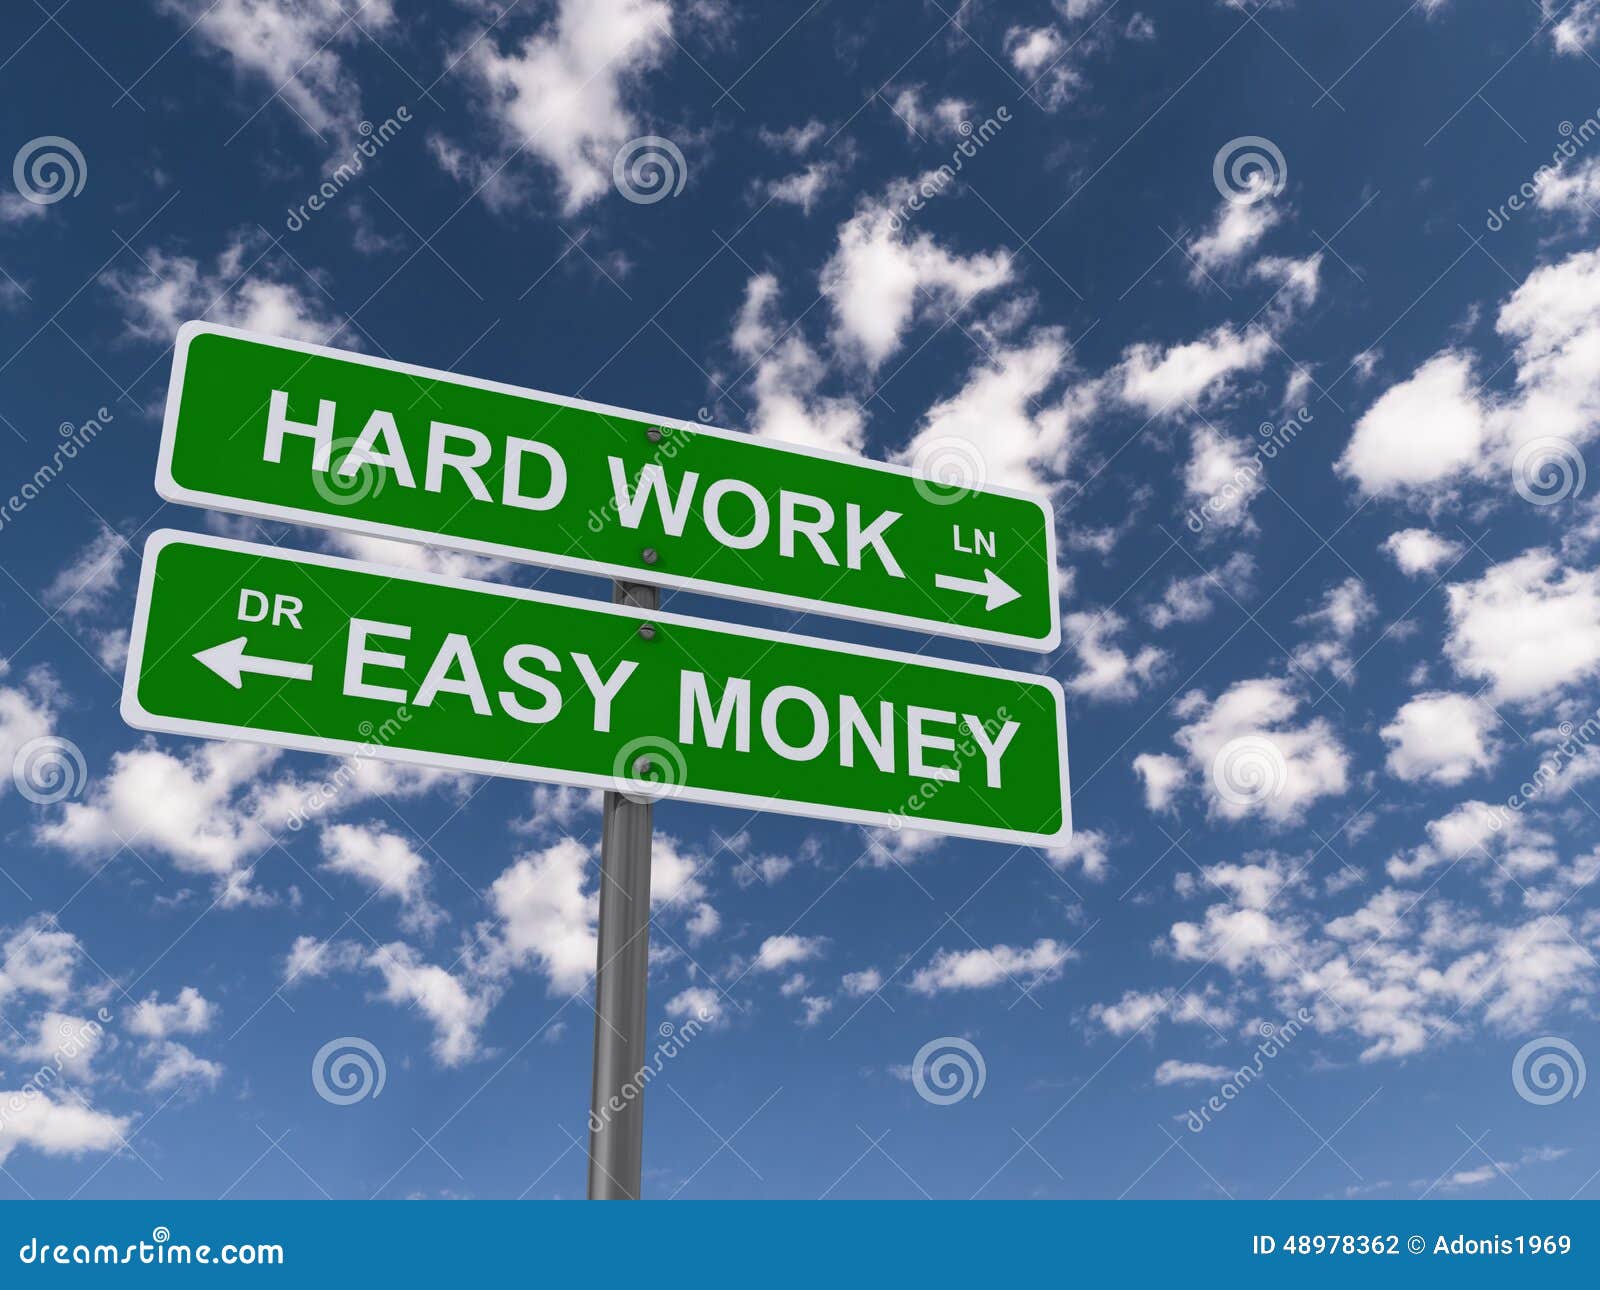 hard work and easy money sign